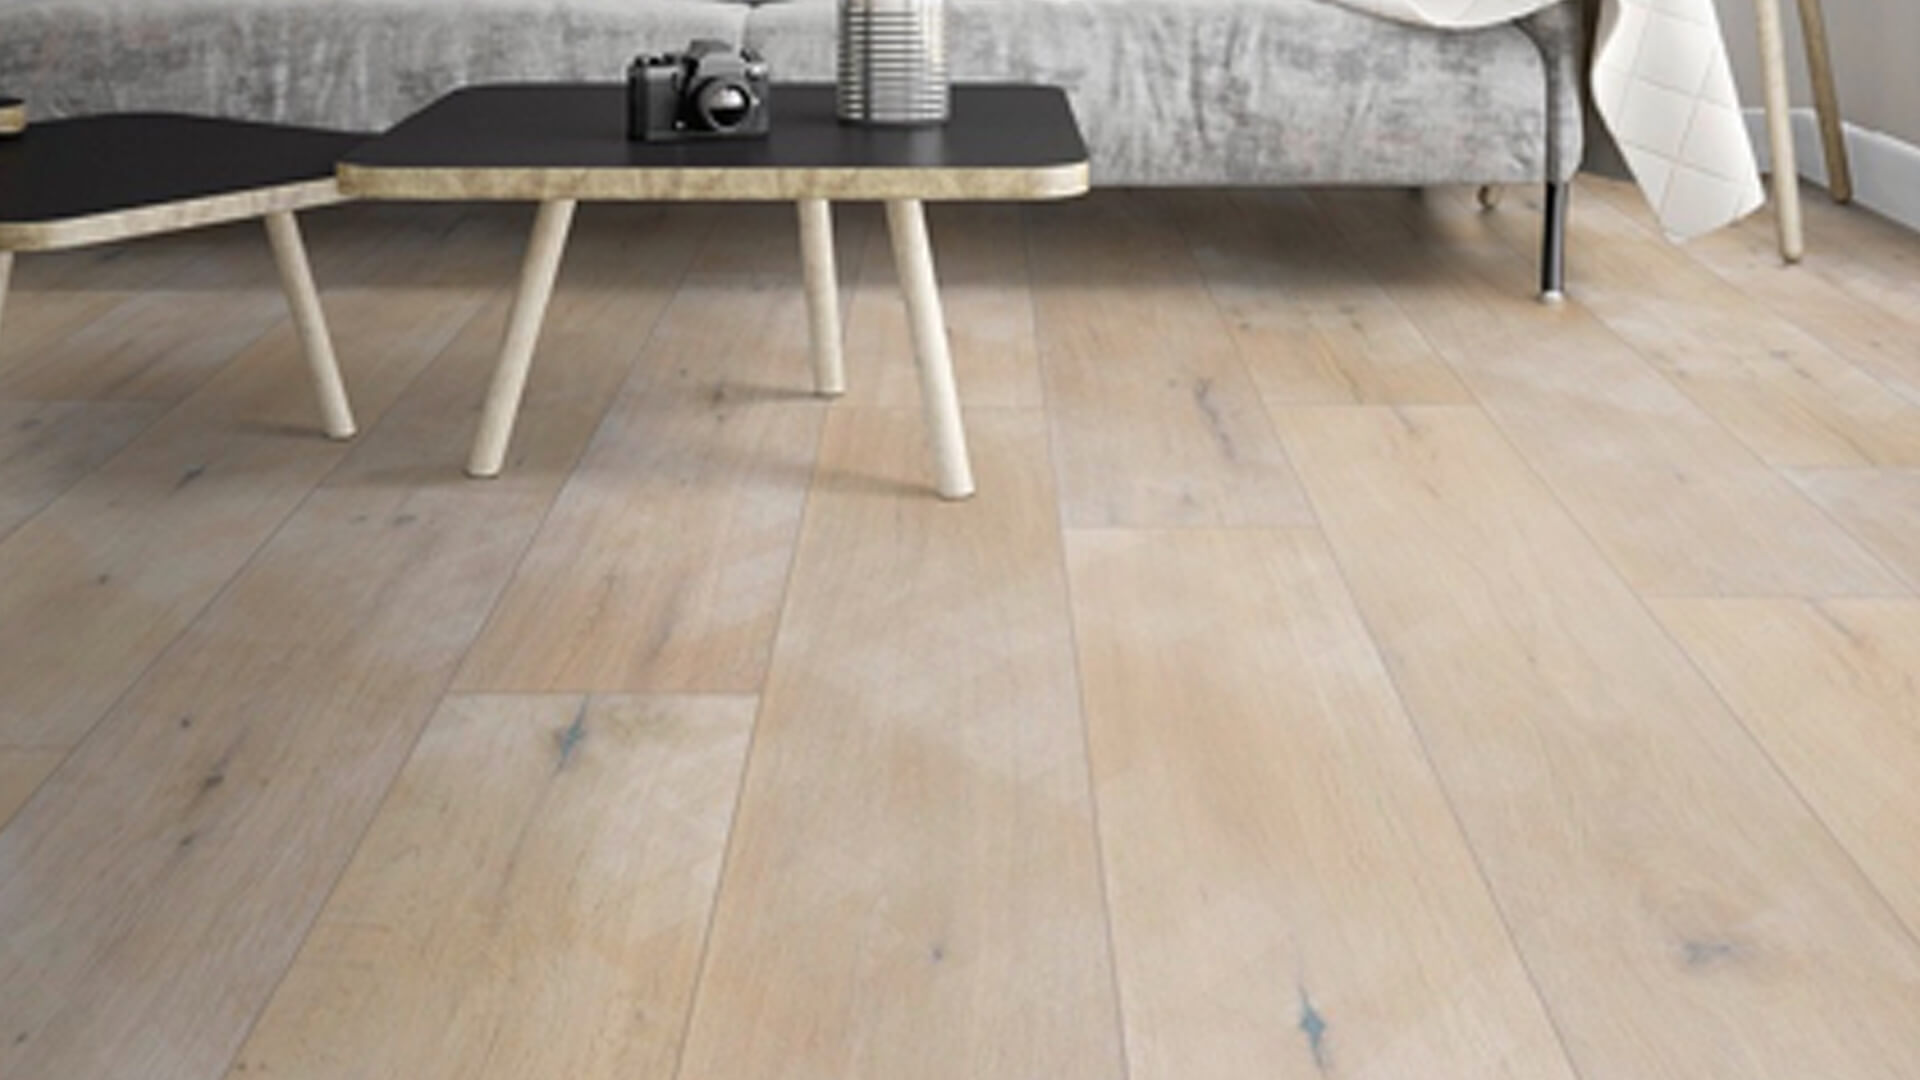 Blog IDW - All types of flooring for your home